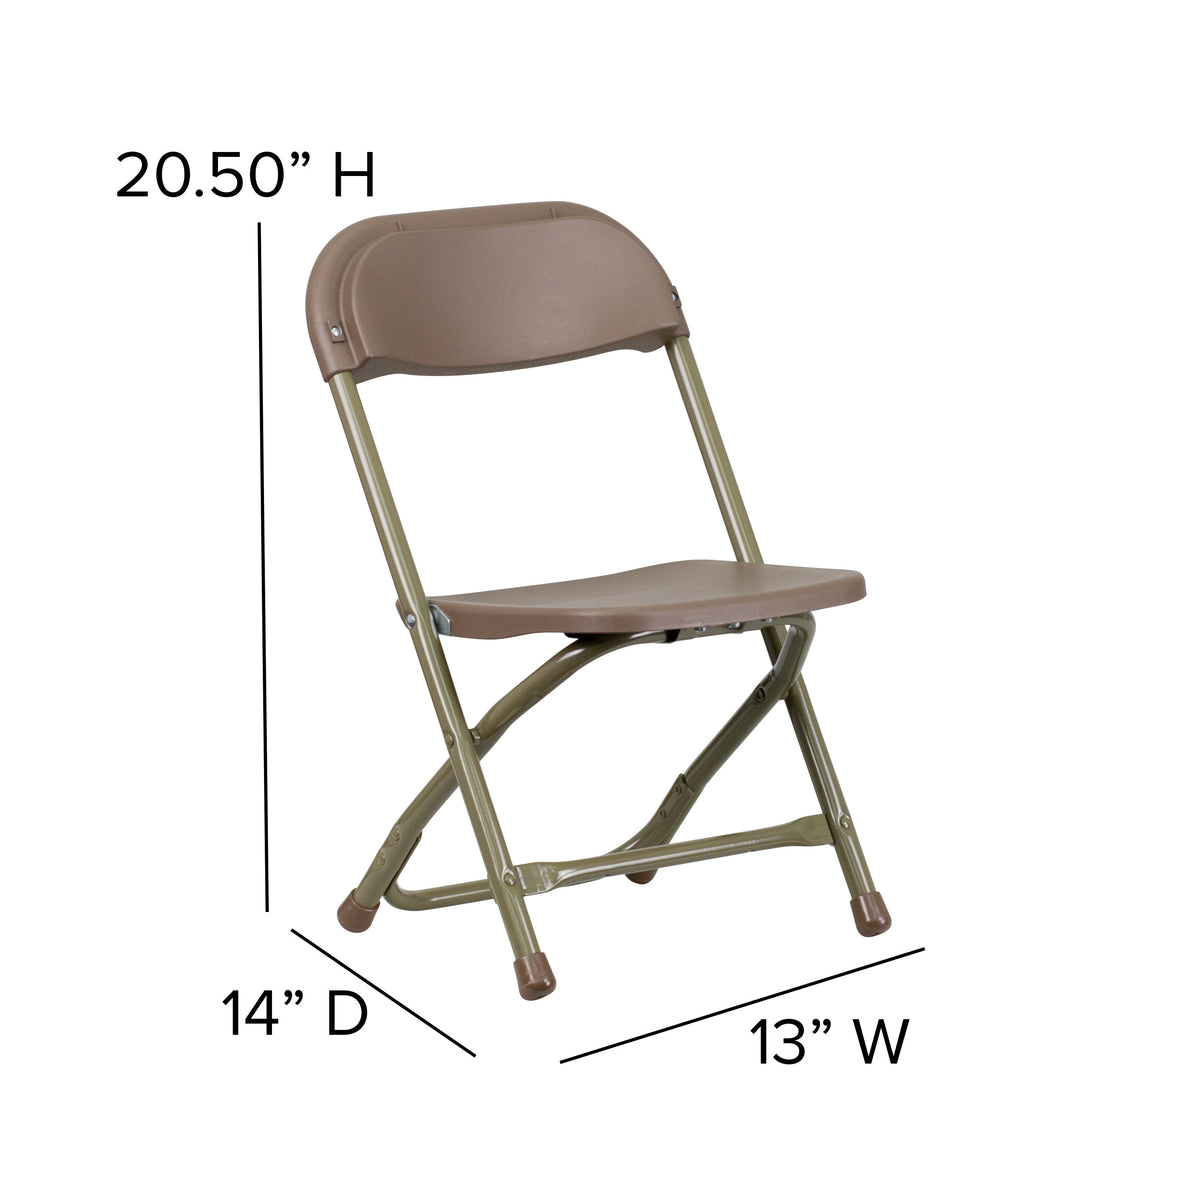 Brown |#| Kids Brown Plastic Folding Chair with Textured Seat - Preschool Seating